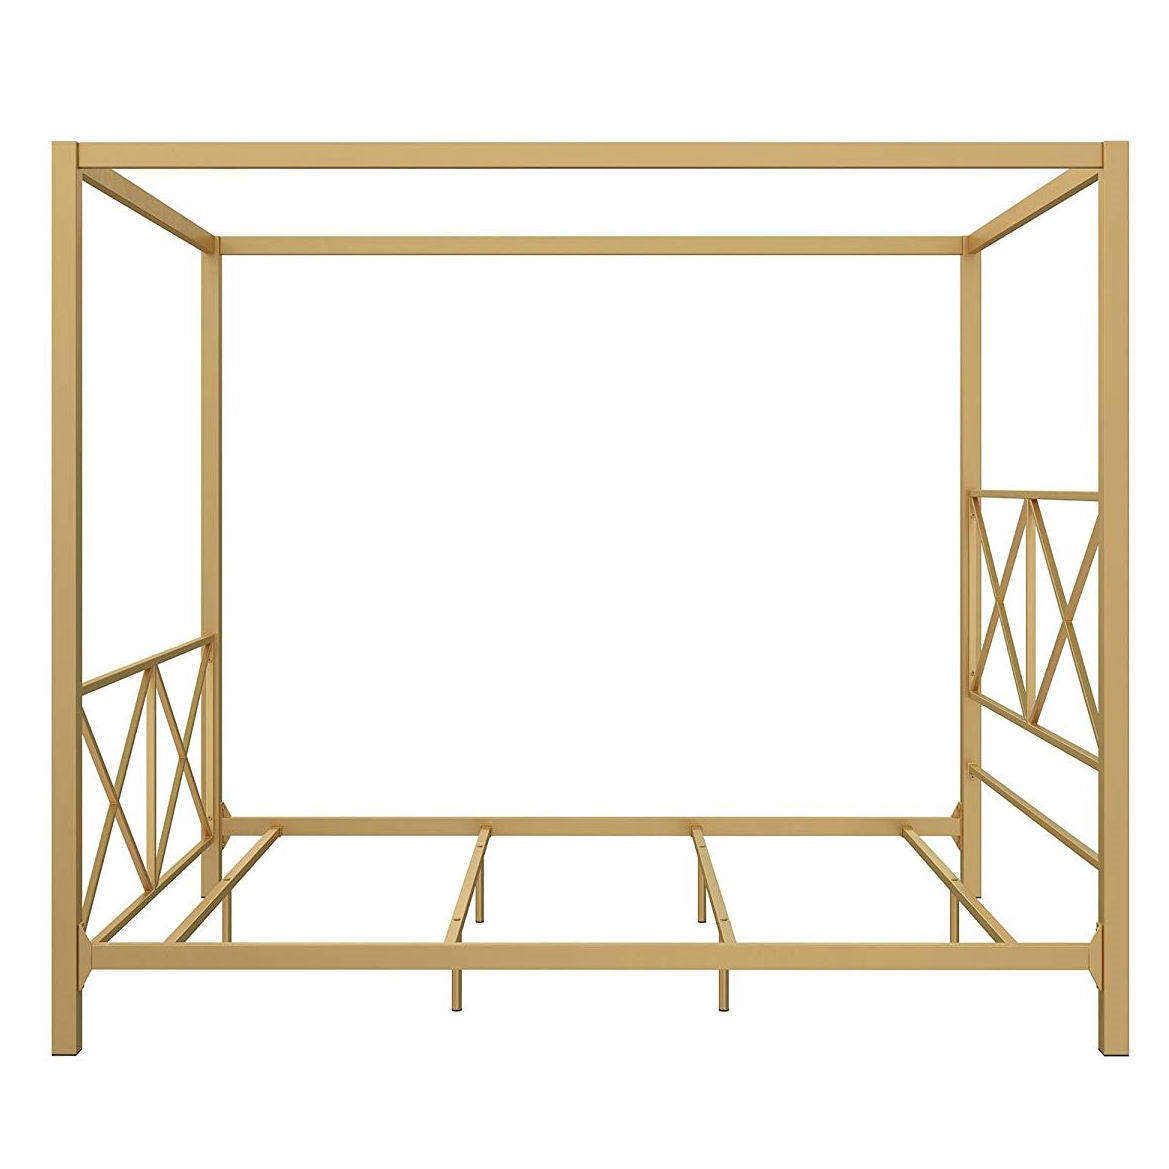 Bedroom > Bed Frames > Canopy Beds - Queen Size Modern Gold Metal Canopy Bed Frame With Headboard And Footboard